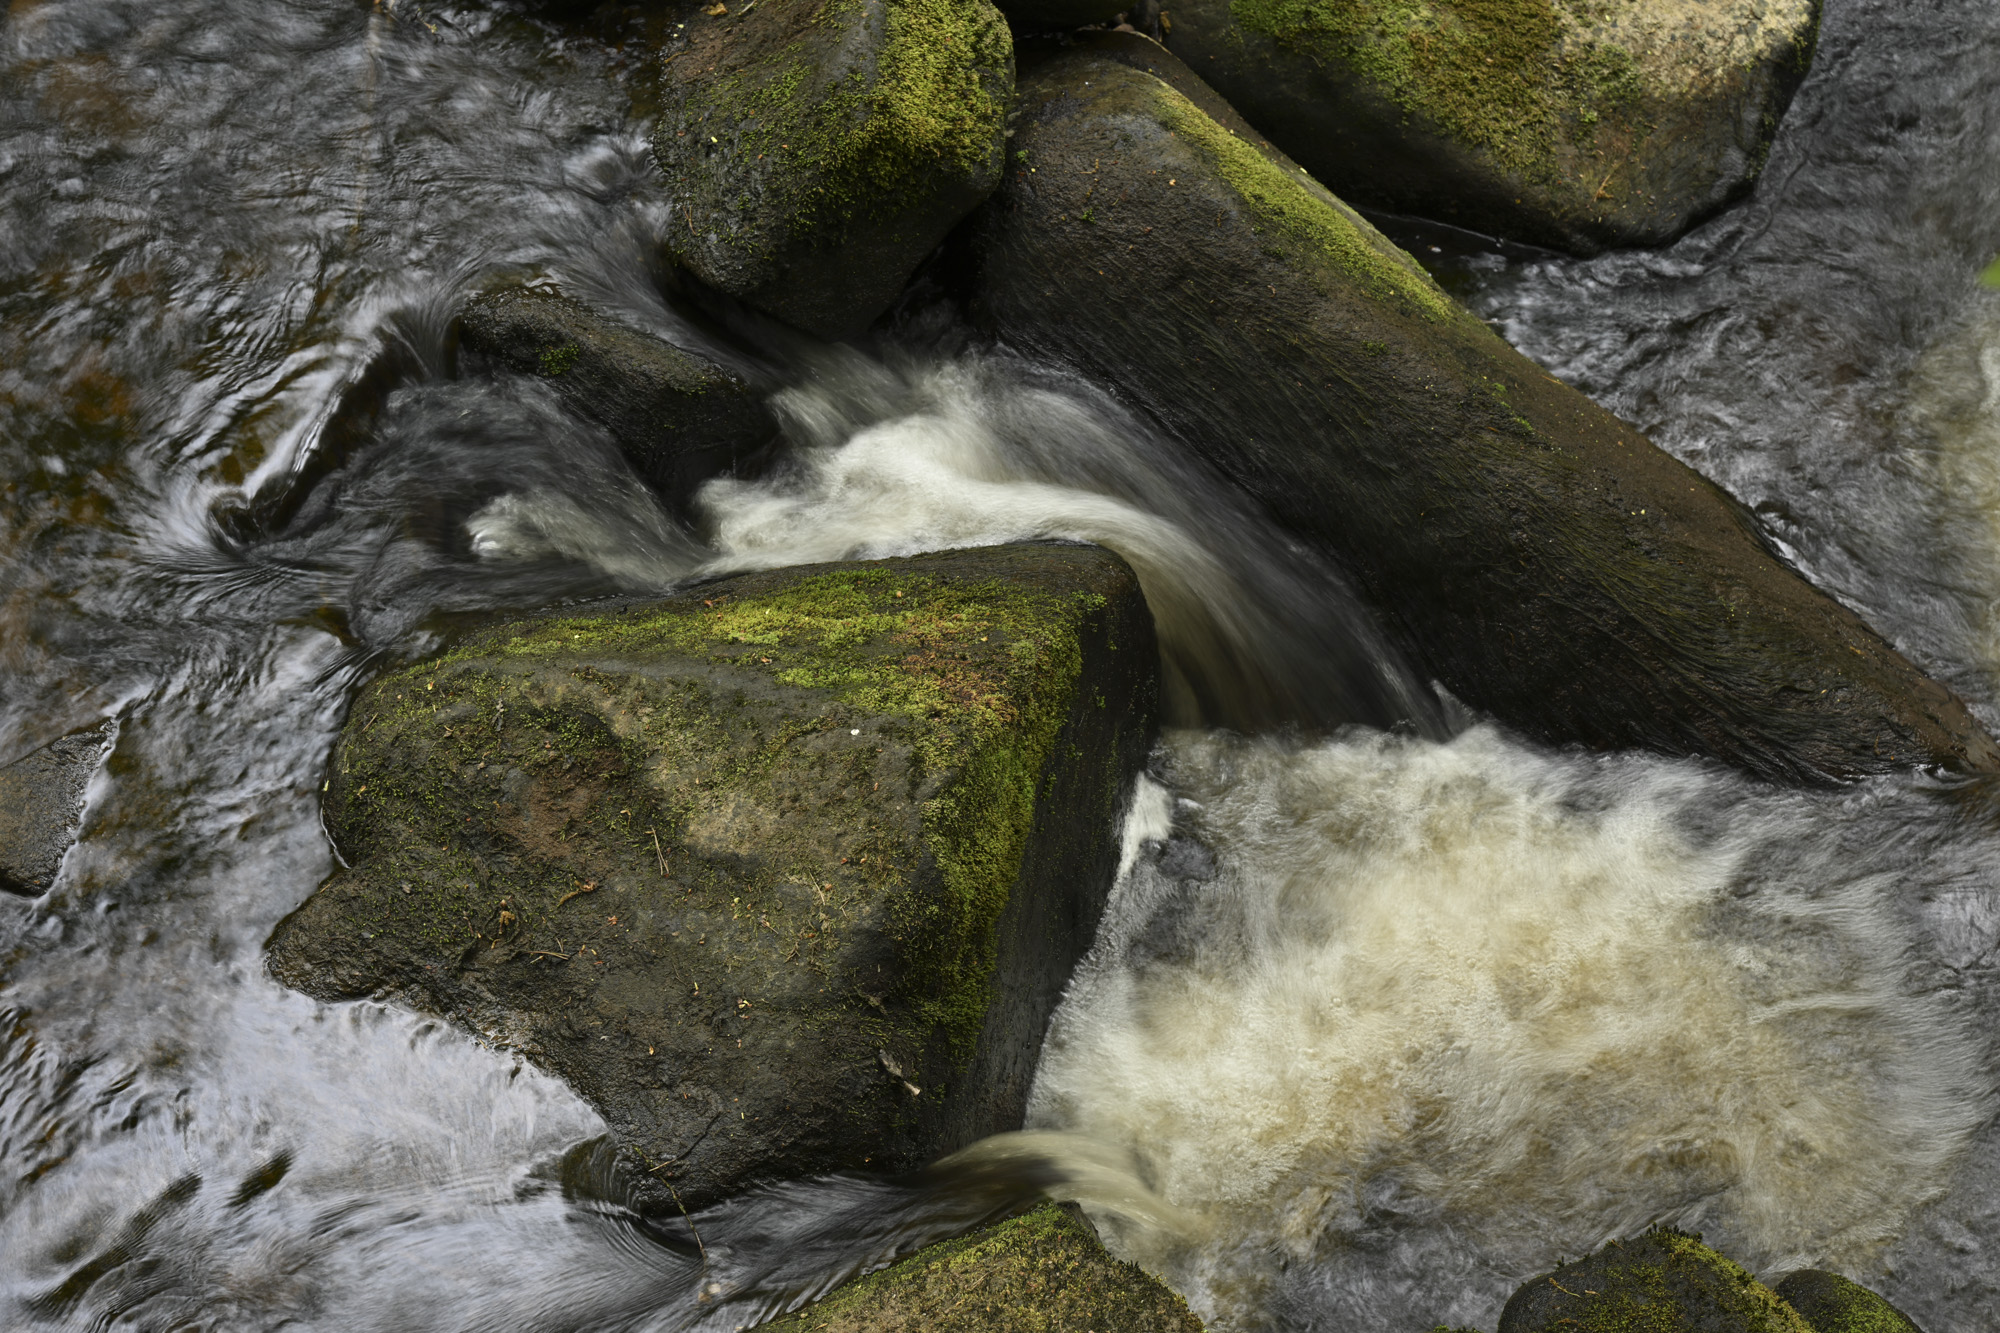 Closeup of a stream and rocks with motion blur in the moving water